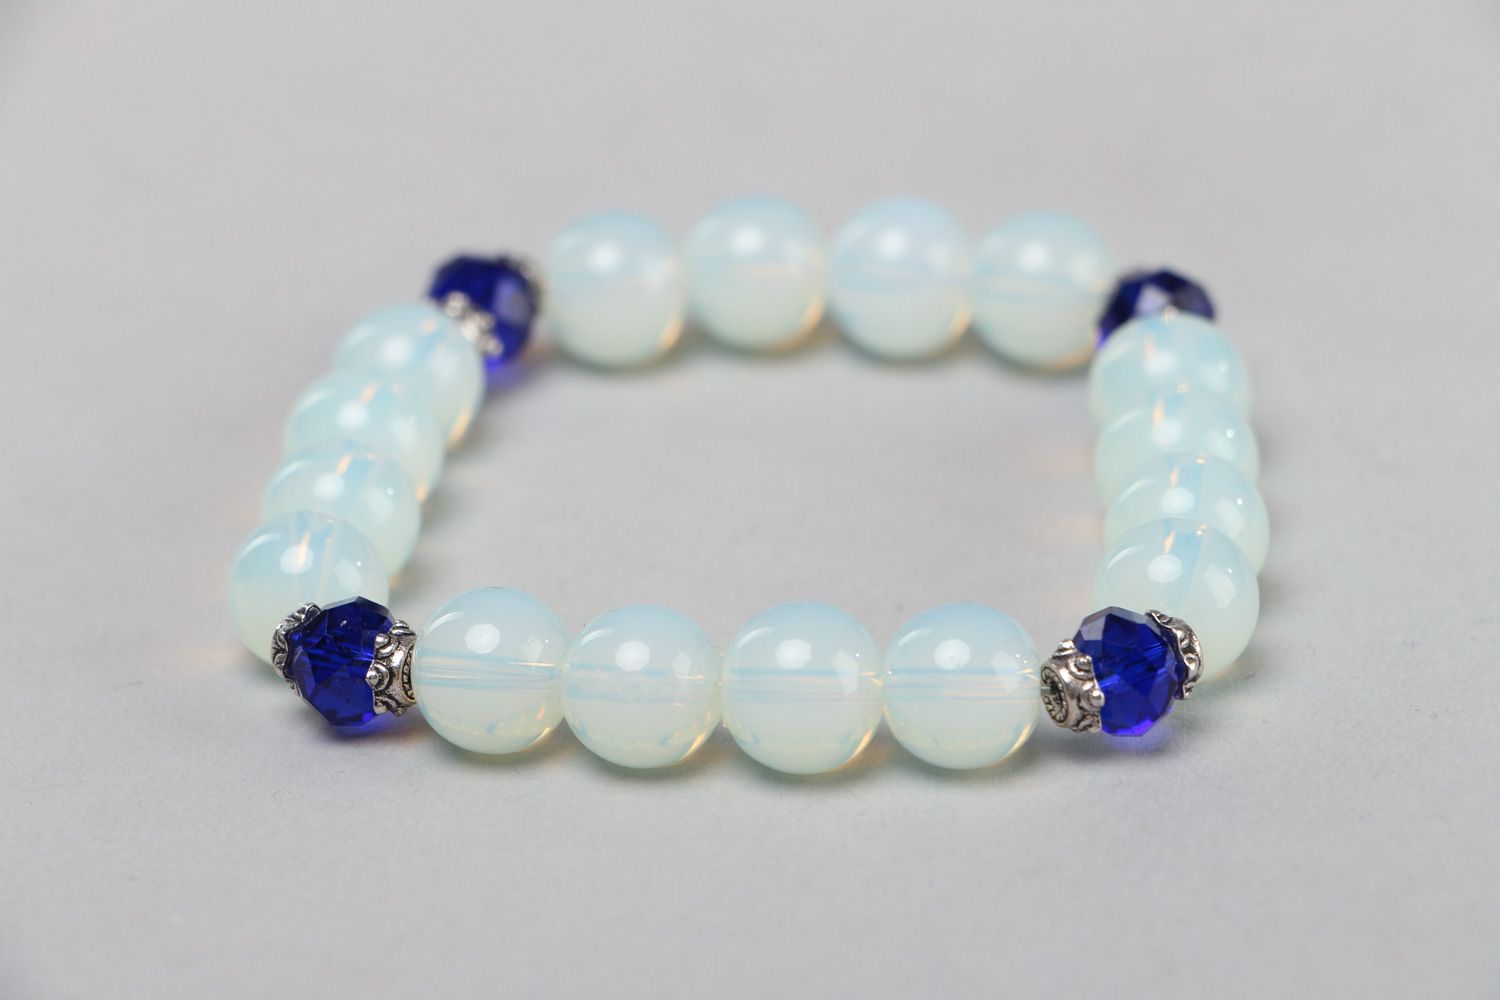 Handmade stretch wrist bracelet with moon stone and blue glass beads for women photo 1